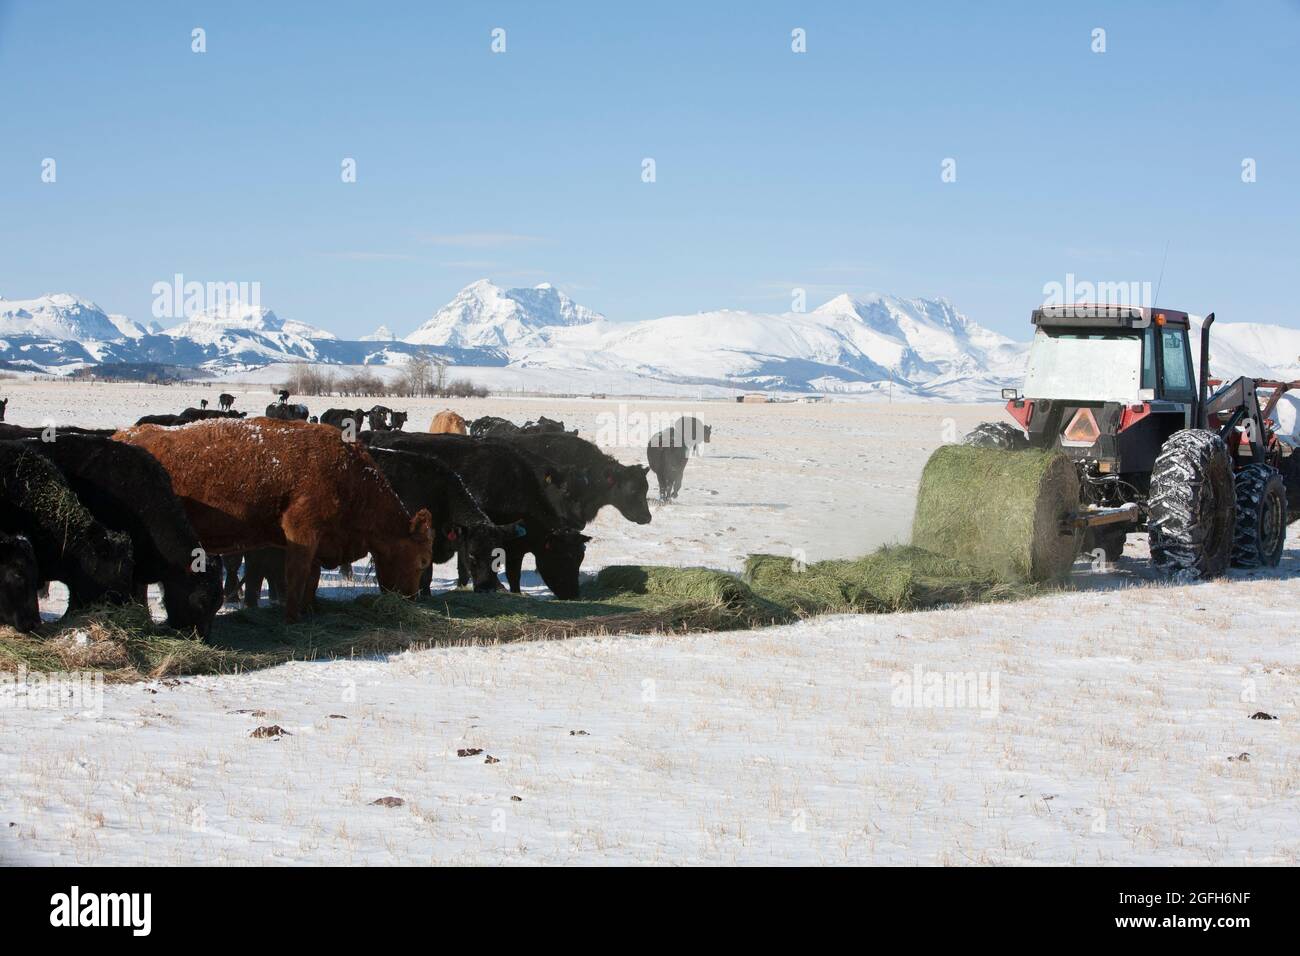 Black Angus cattle swarm over a path of hay rolled out across a snowy field, Rocky Mountains in background. Stock Photo